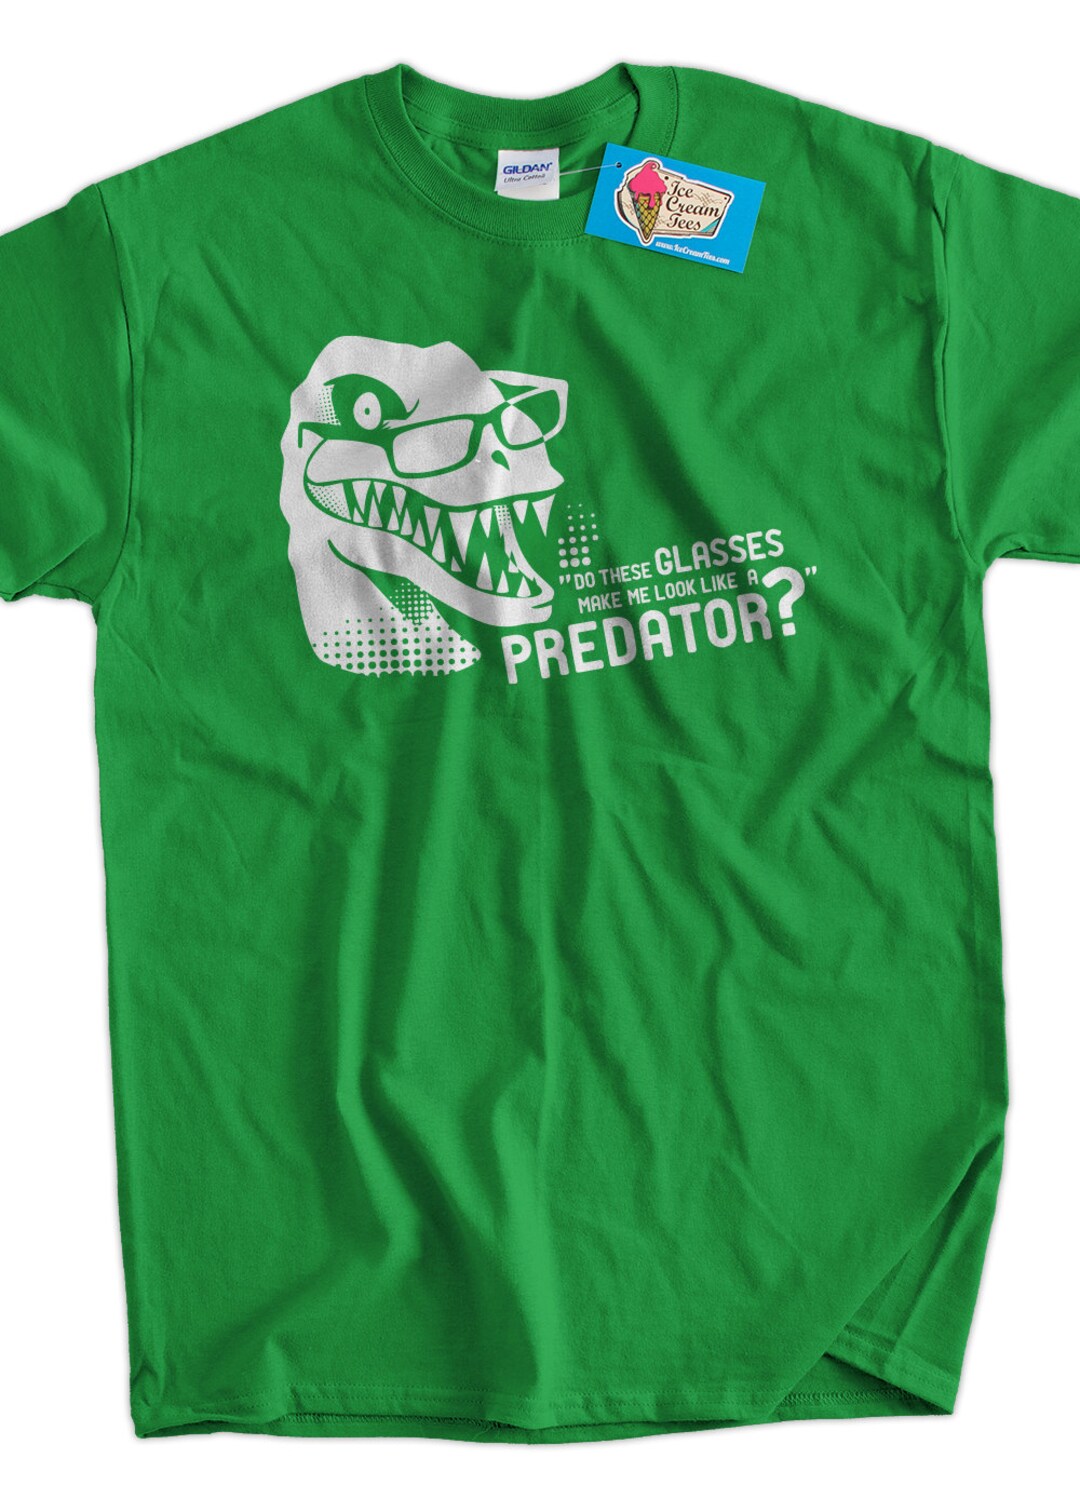 T-Rex Do These Glasses Look Like A Predator? Girl's Cotton Youth Grey T- Shirt 